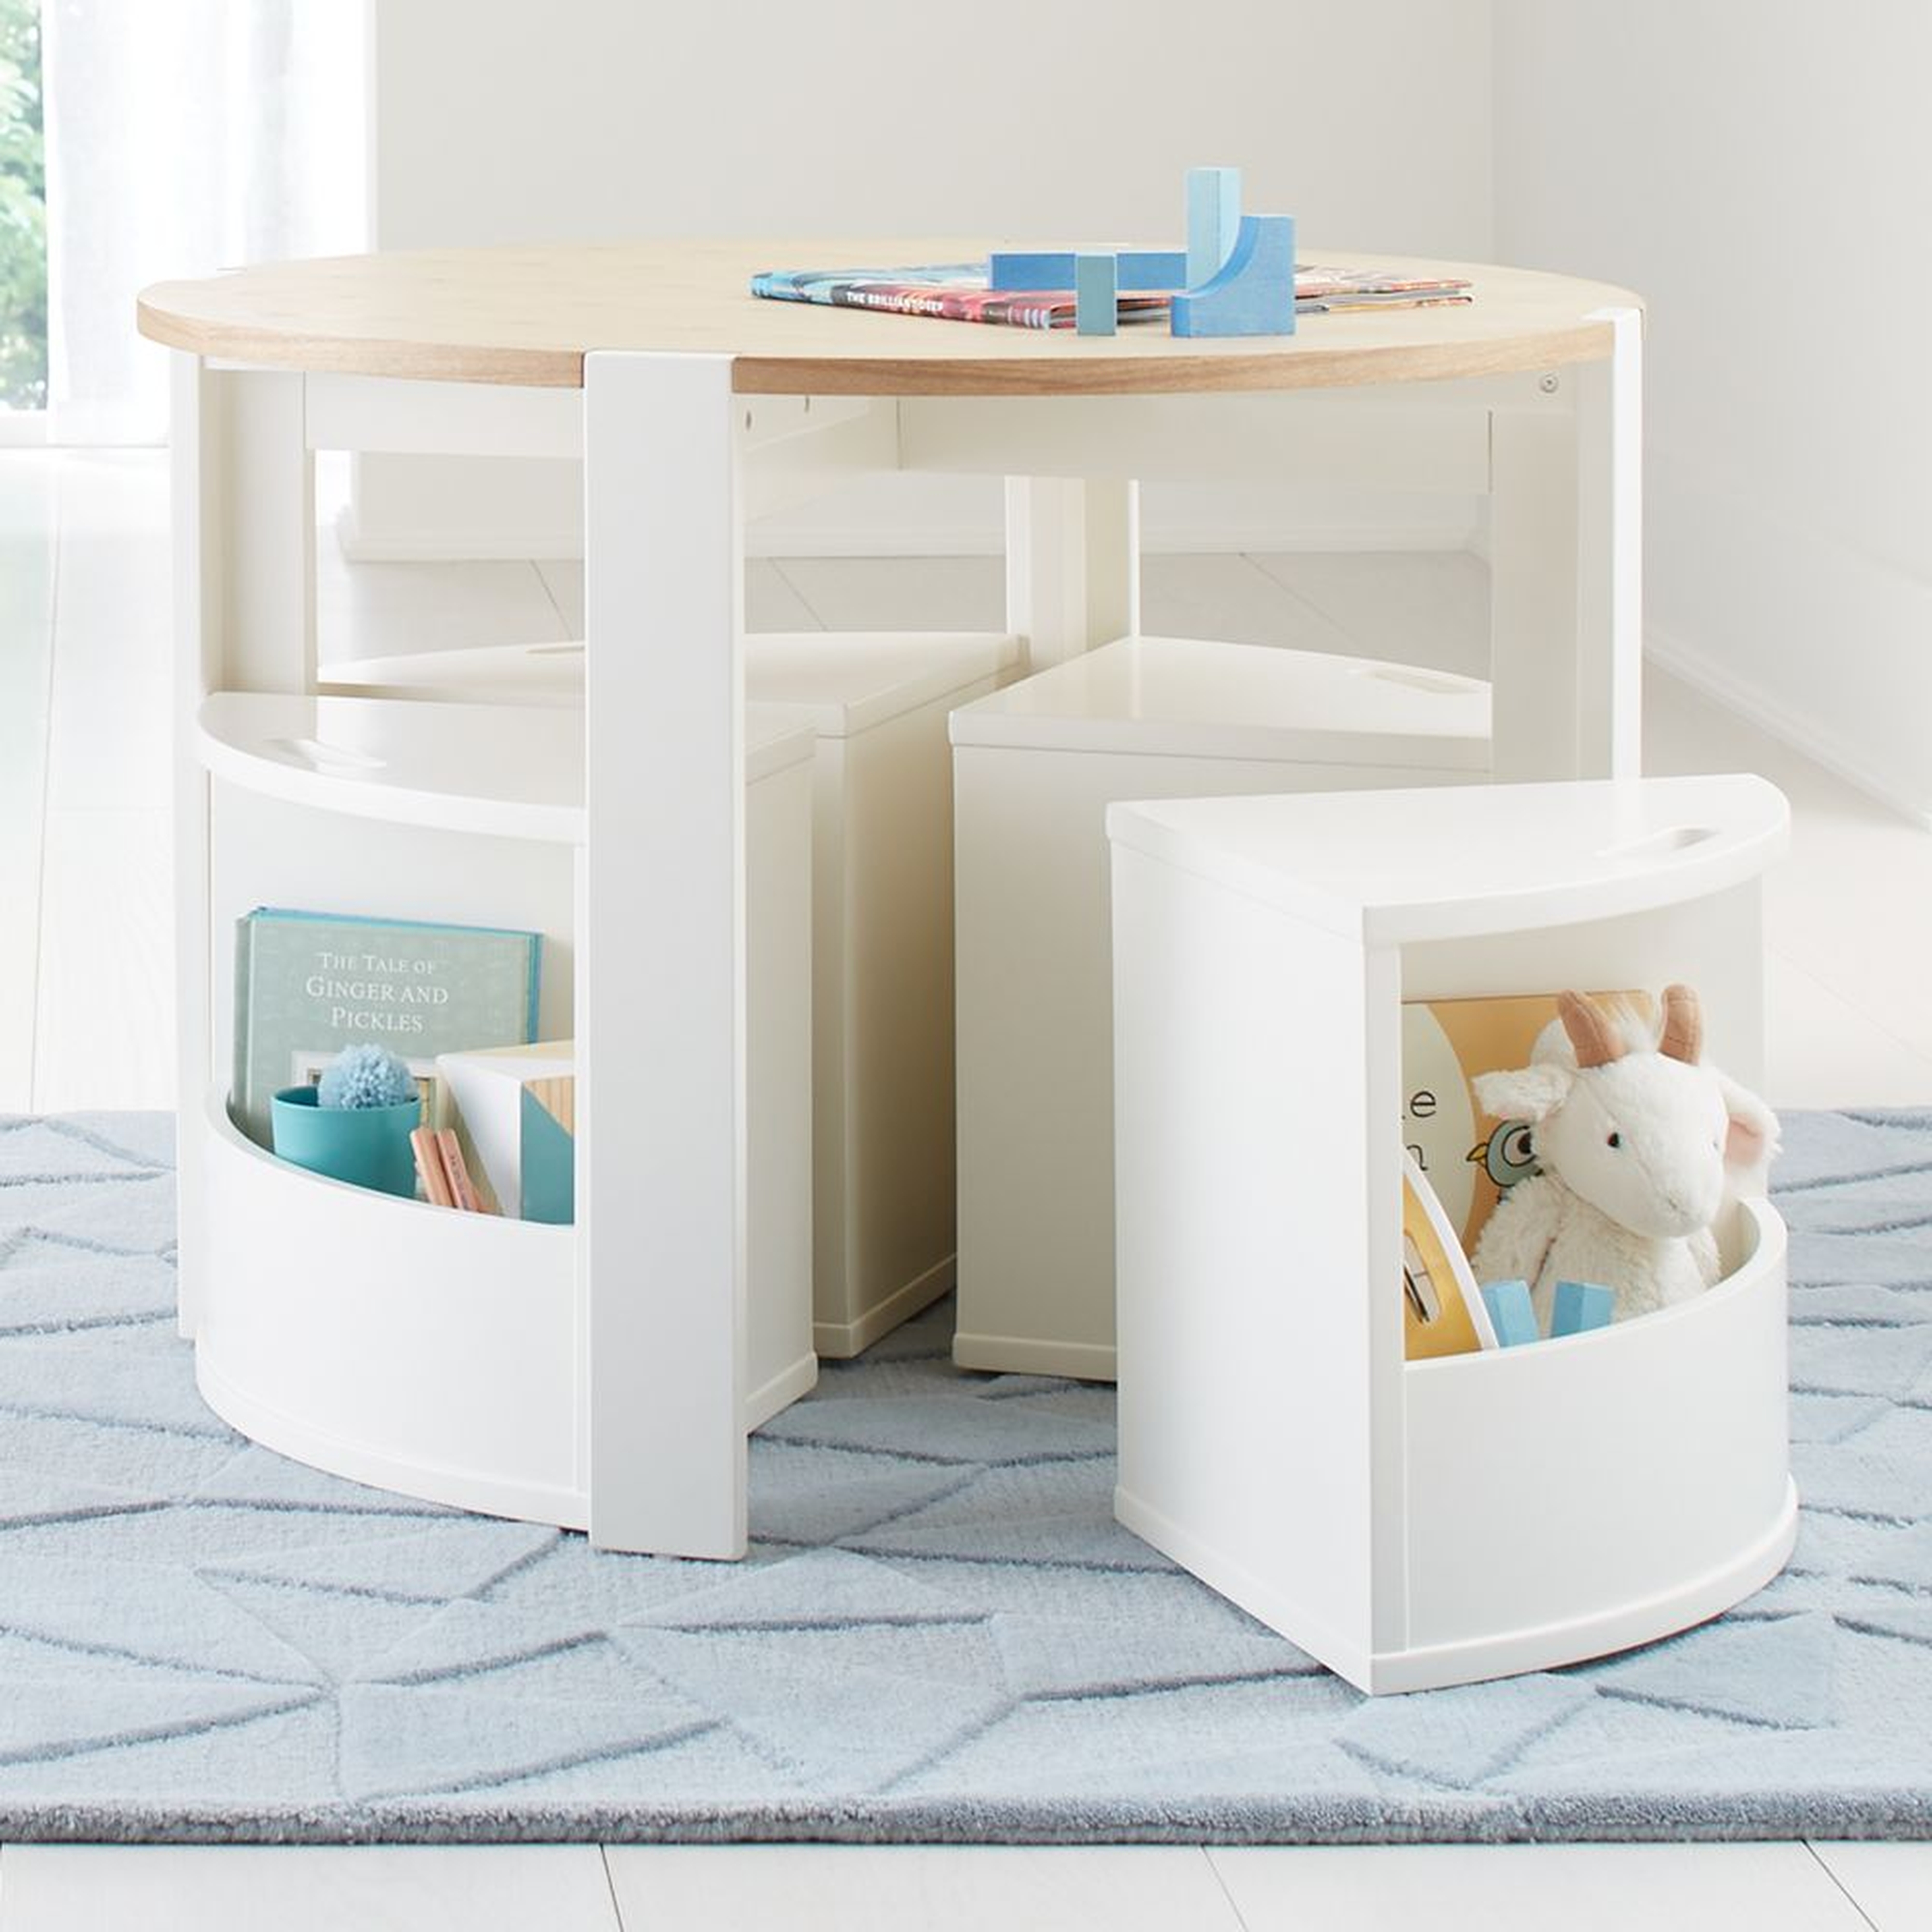 Nesting White Play Table and Chairs - Crate and Barrel